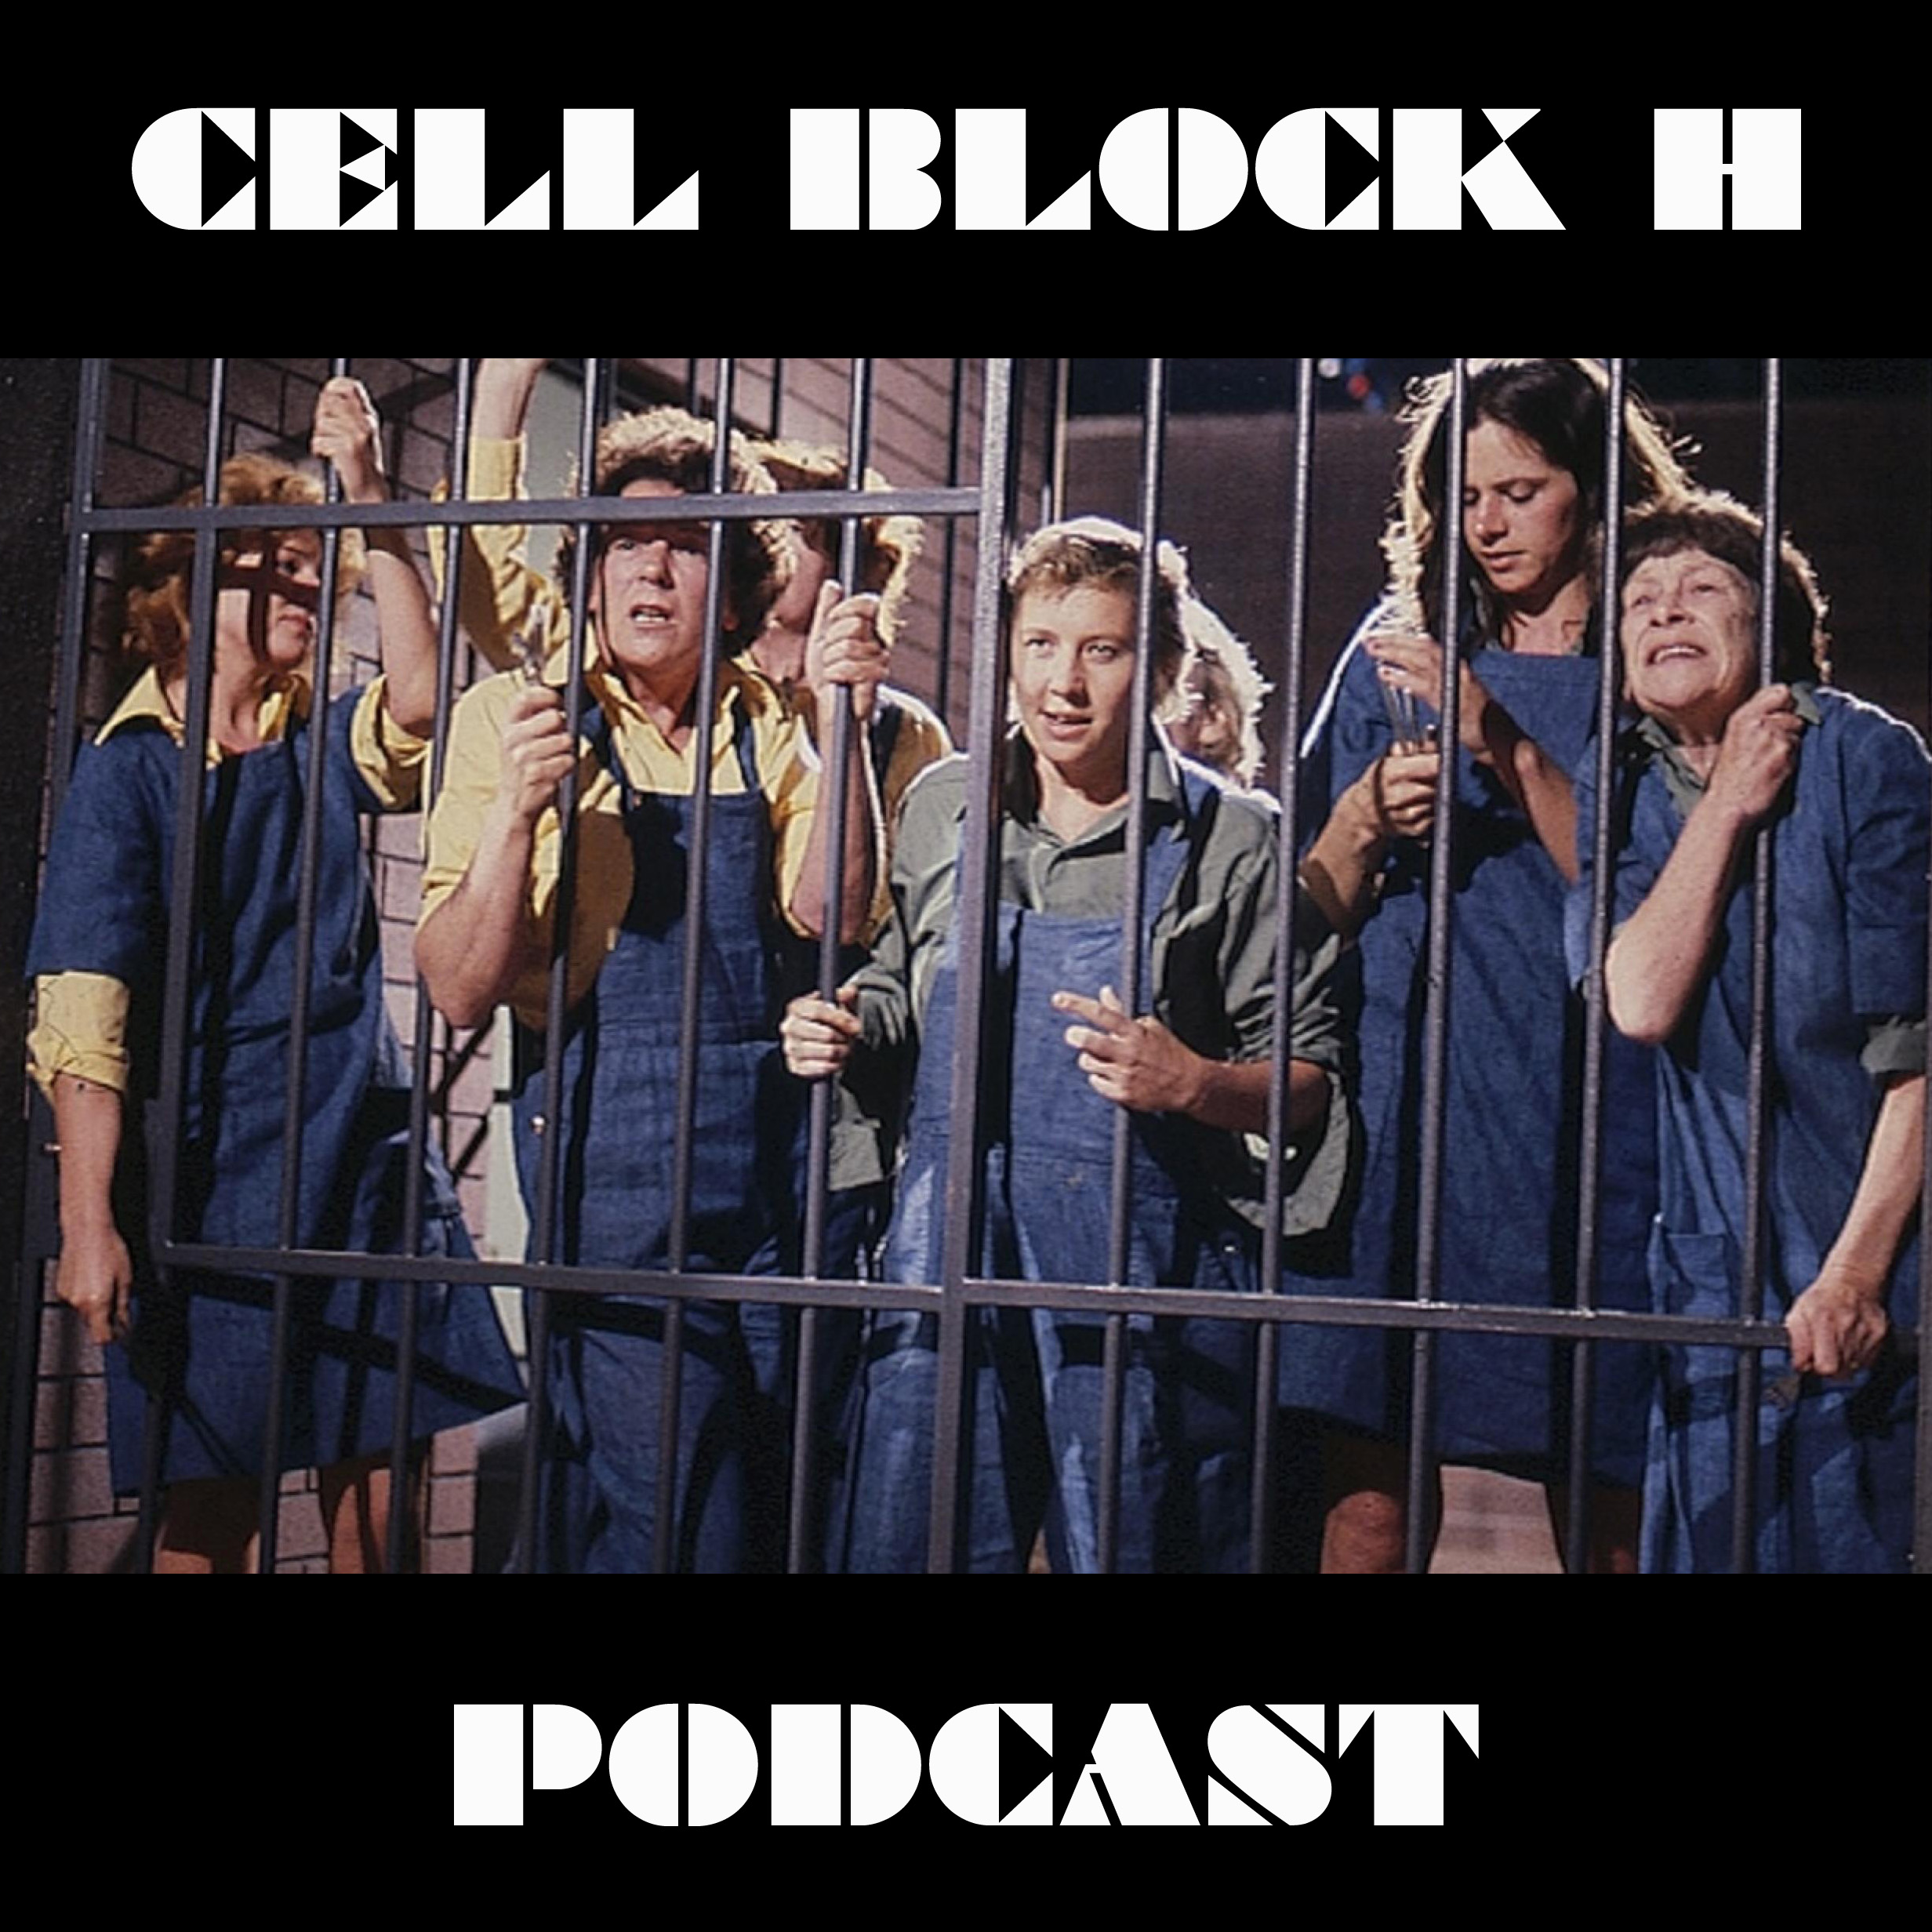 Cell Block H Podcast - A Introductory Episode